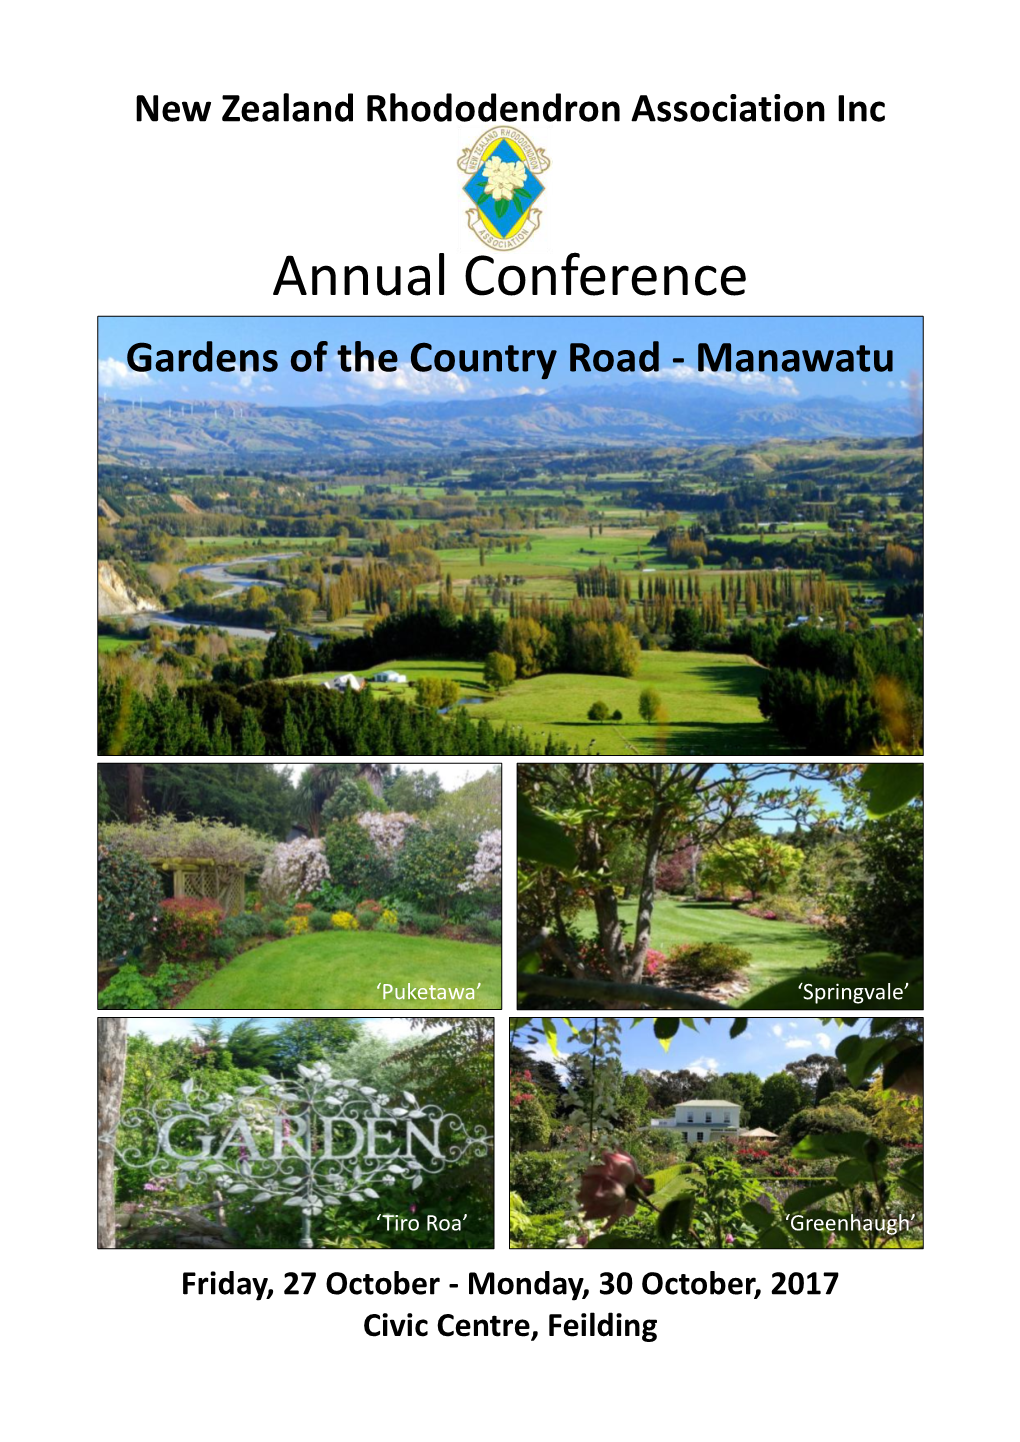 Annual Conference Gardens of the Country Road - Manawatu